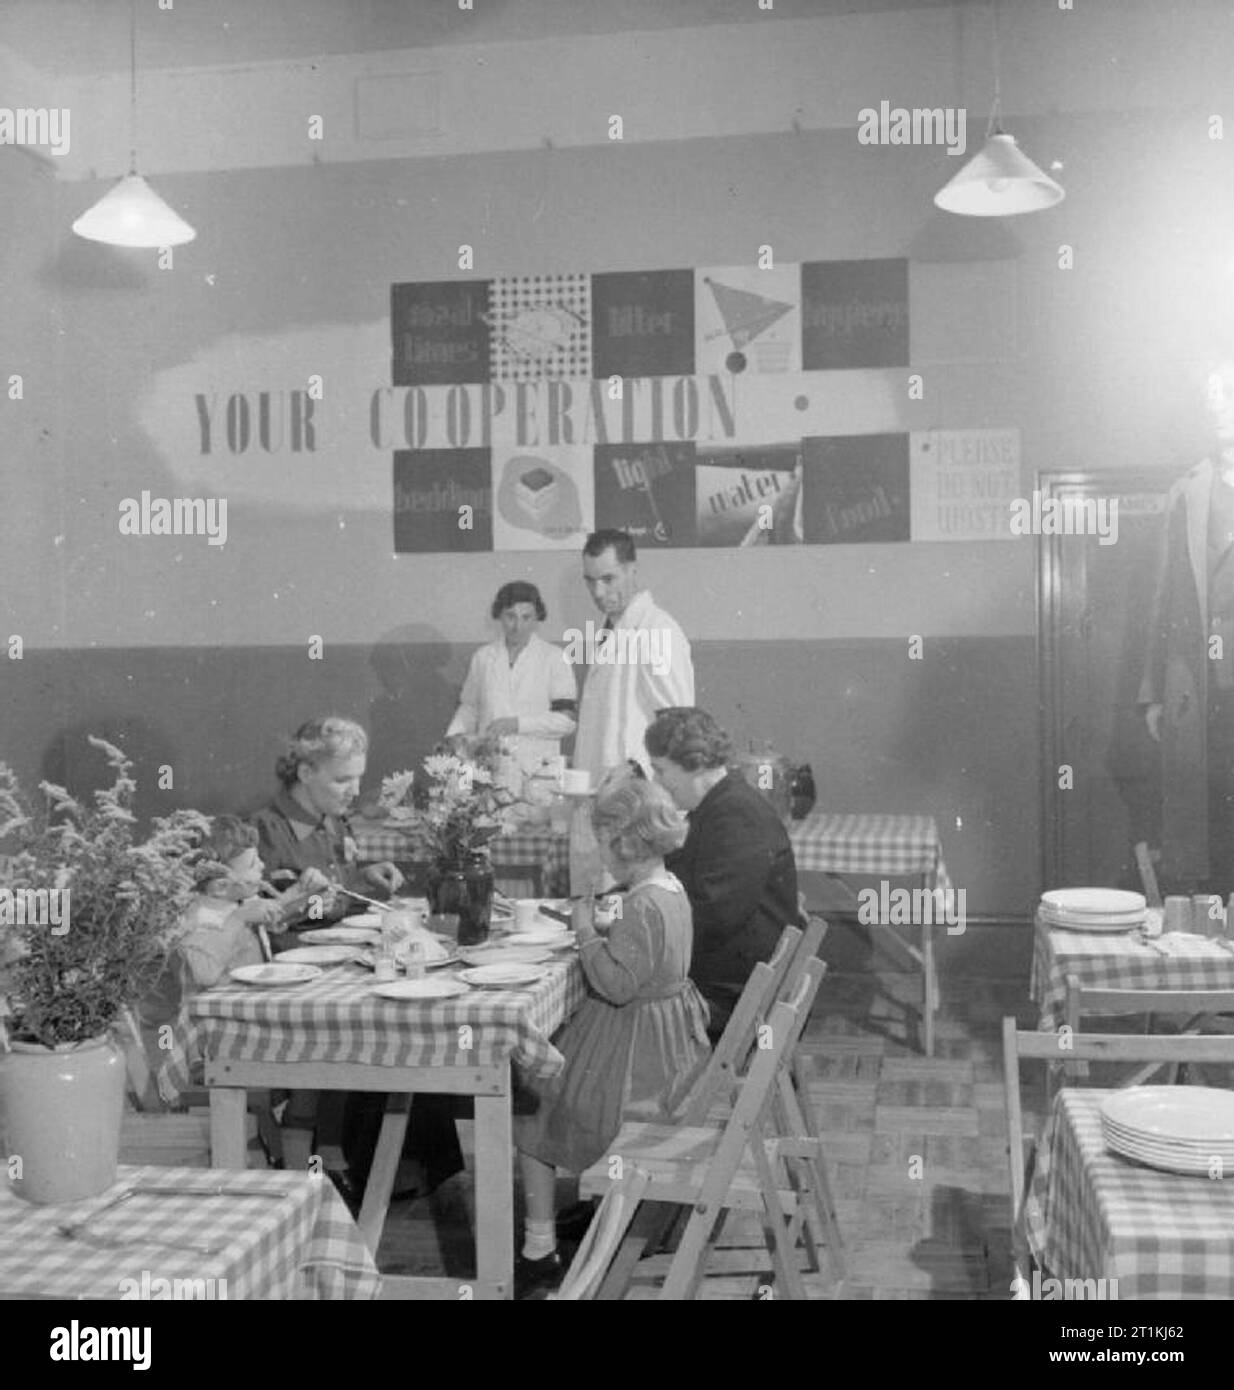 Civil Defence and Welfare Services in Wartime Britain- the work of the Rest Centre, 1942 A bombed-out family enjoy a meal at a rest centre. Checked table cloths and flowers provide a welcoming and cheery atmosphere to those who have lost their homes through air raids. One of the two welfare workers visible in the photographs brings a cup of tea over to the table. Stock Photo